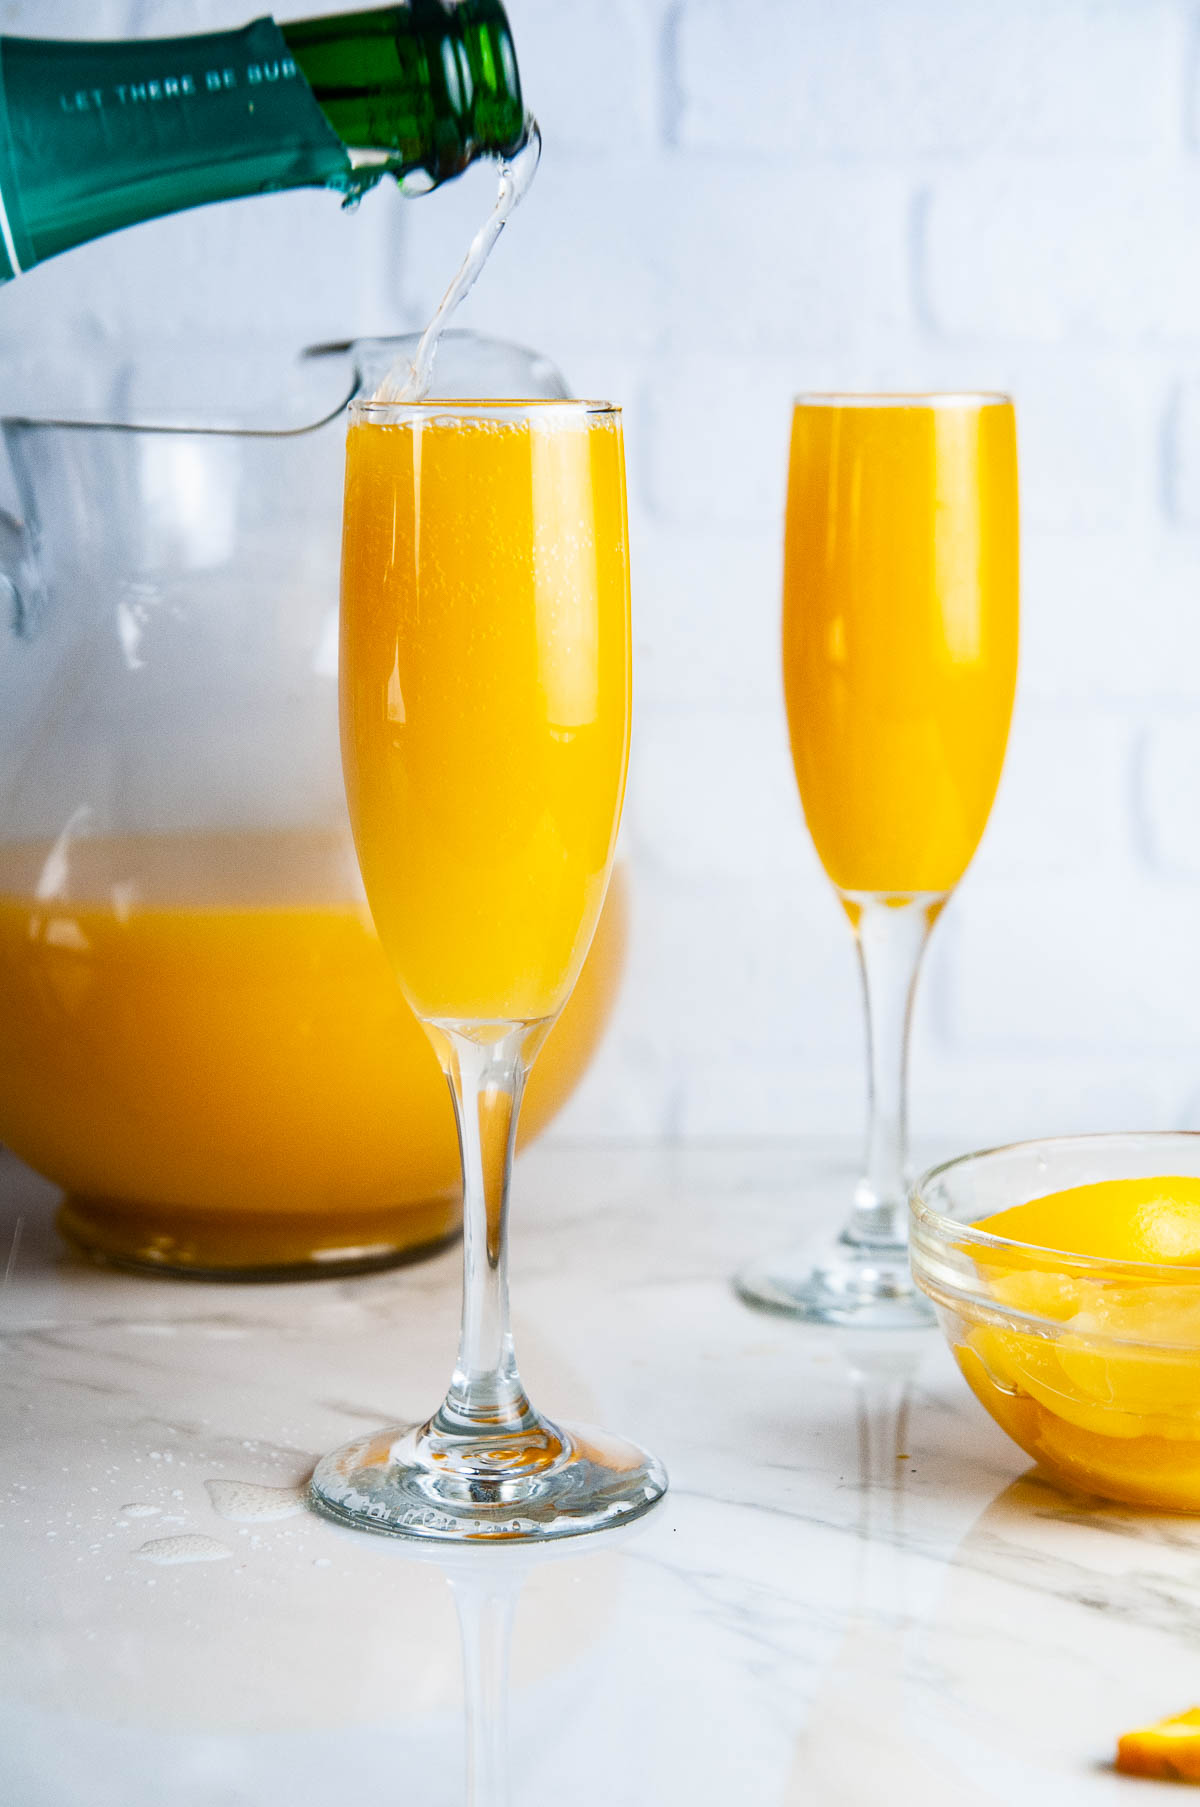 Fill up champagne glasses about halfway with the juice mixture. Then top it off with champagne and peach schnapps.